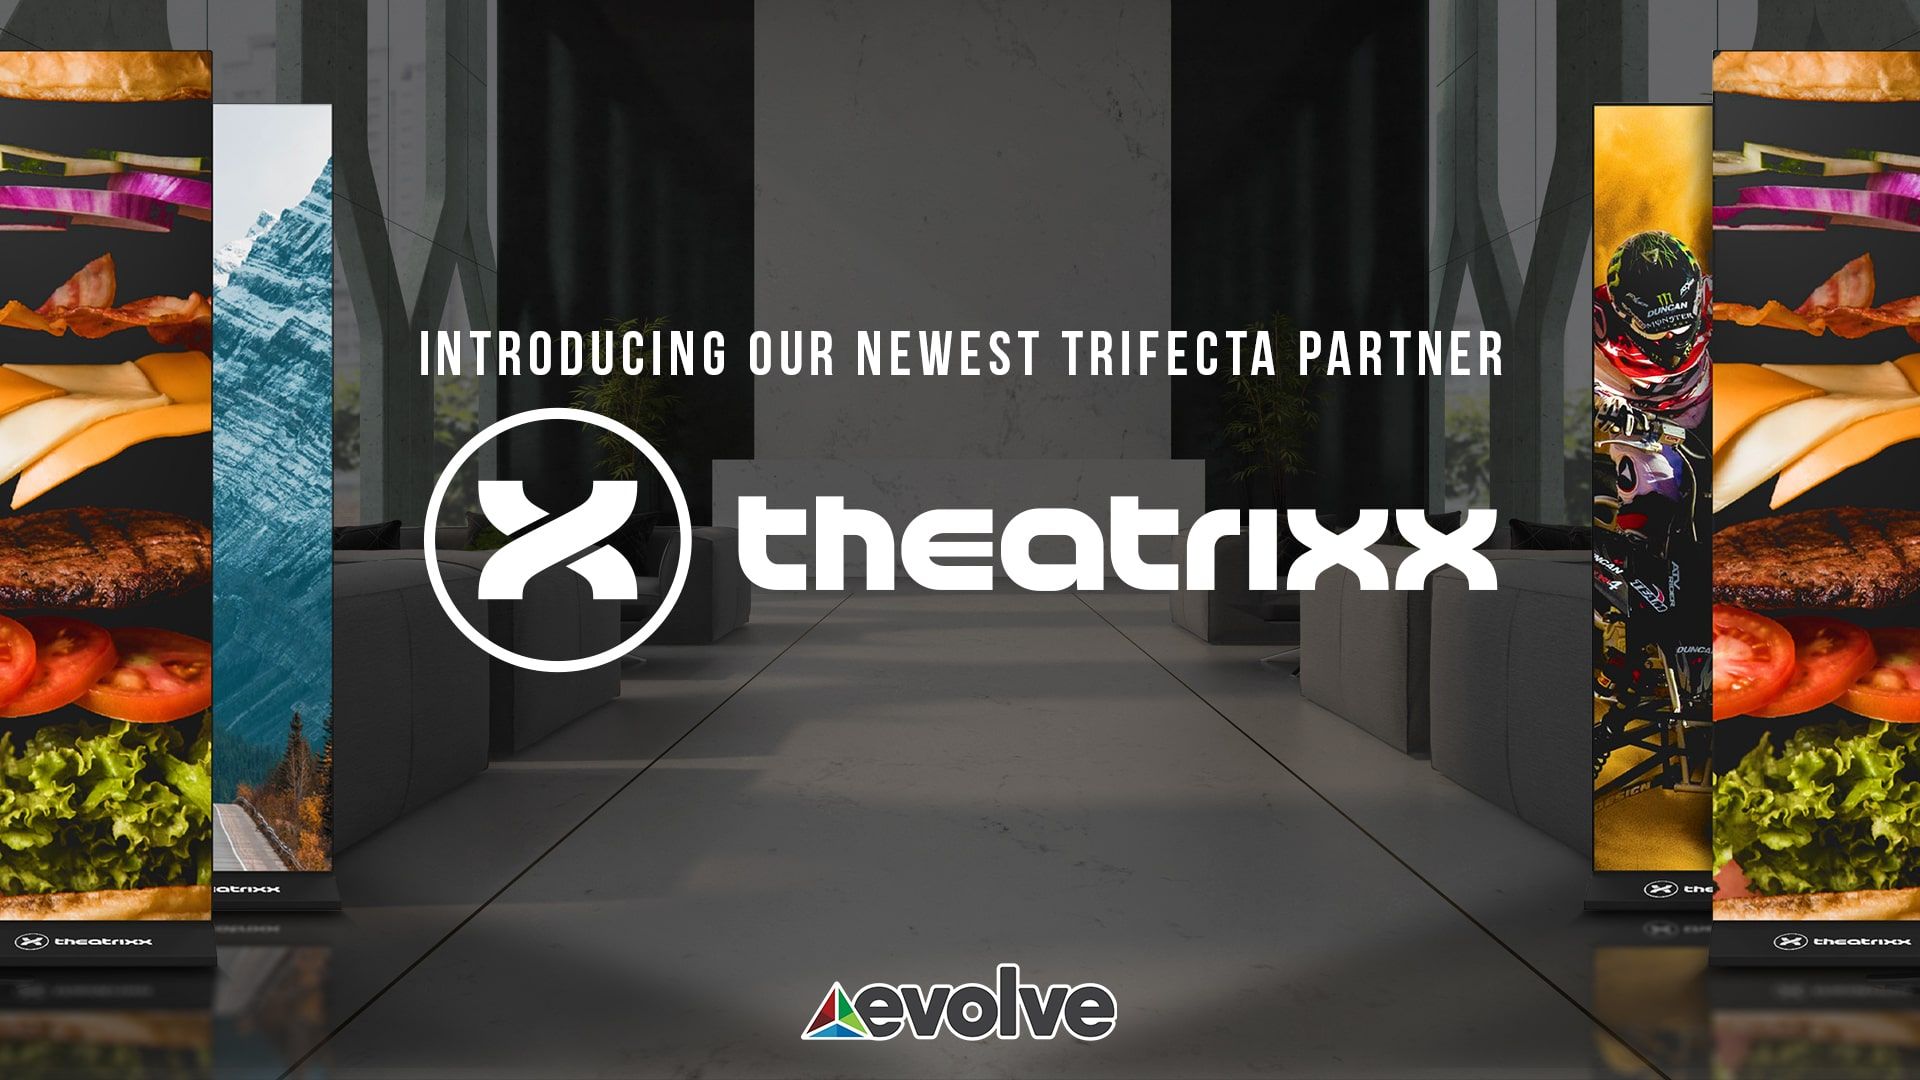 Introducing our newest Audio Visual partner, theatrix, specializing in Barco Projection technology.